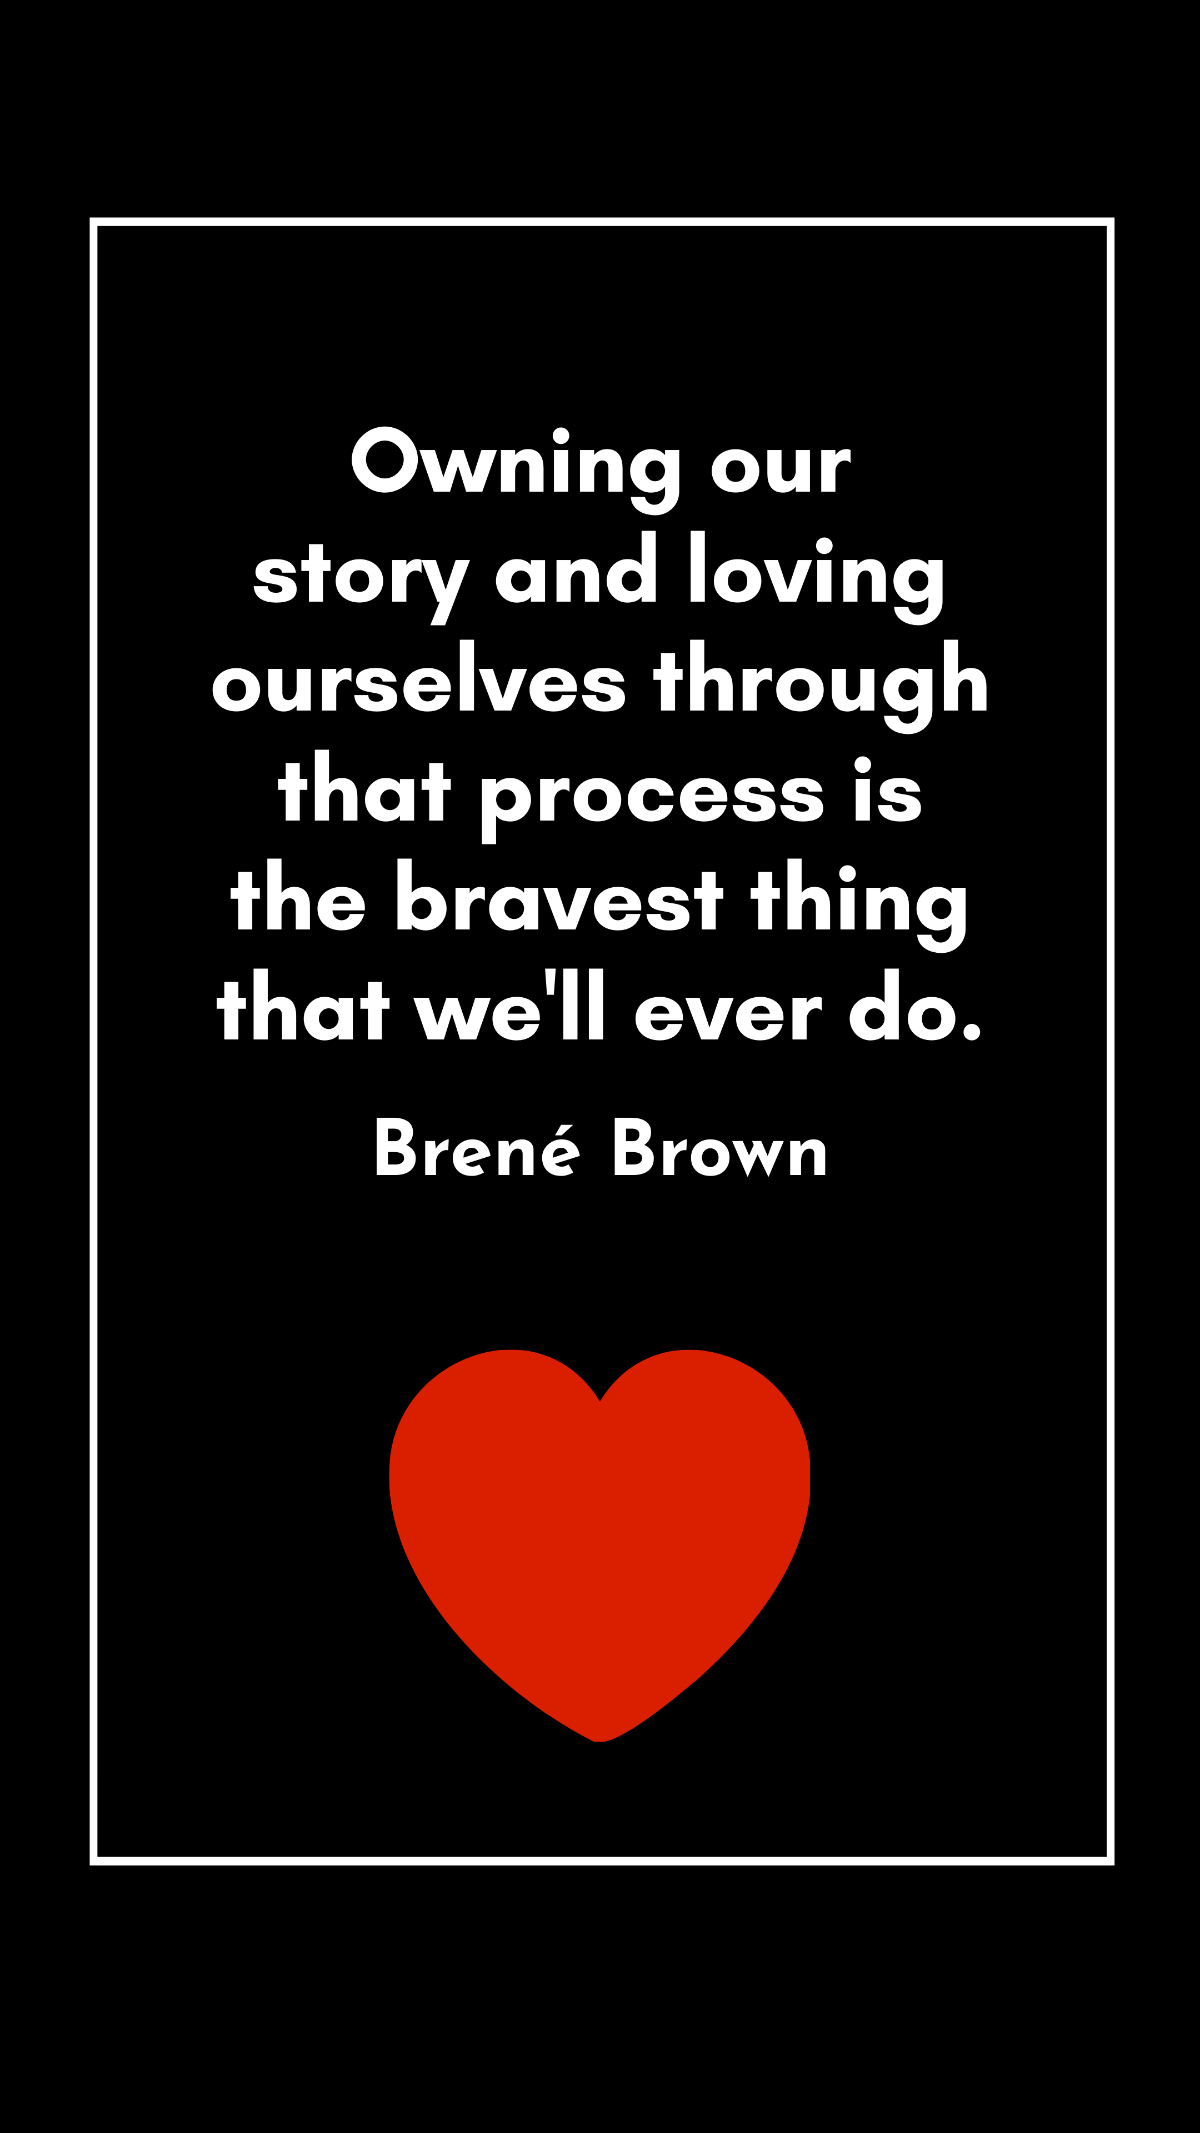 Brené Brown - Owning our story and loving ourselves through that process is the bravest thing that we'll ever do. Template